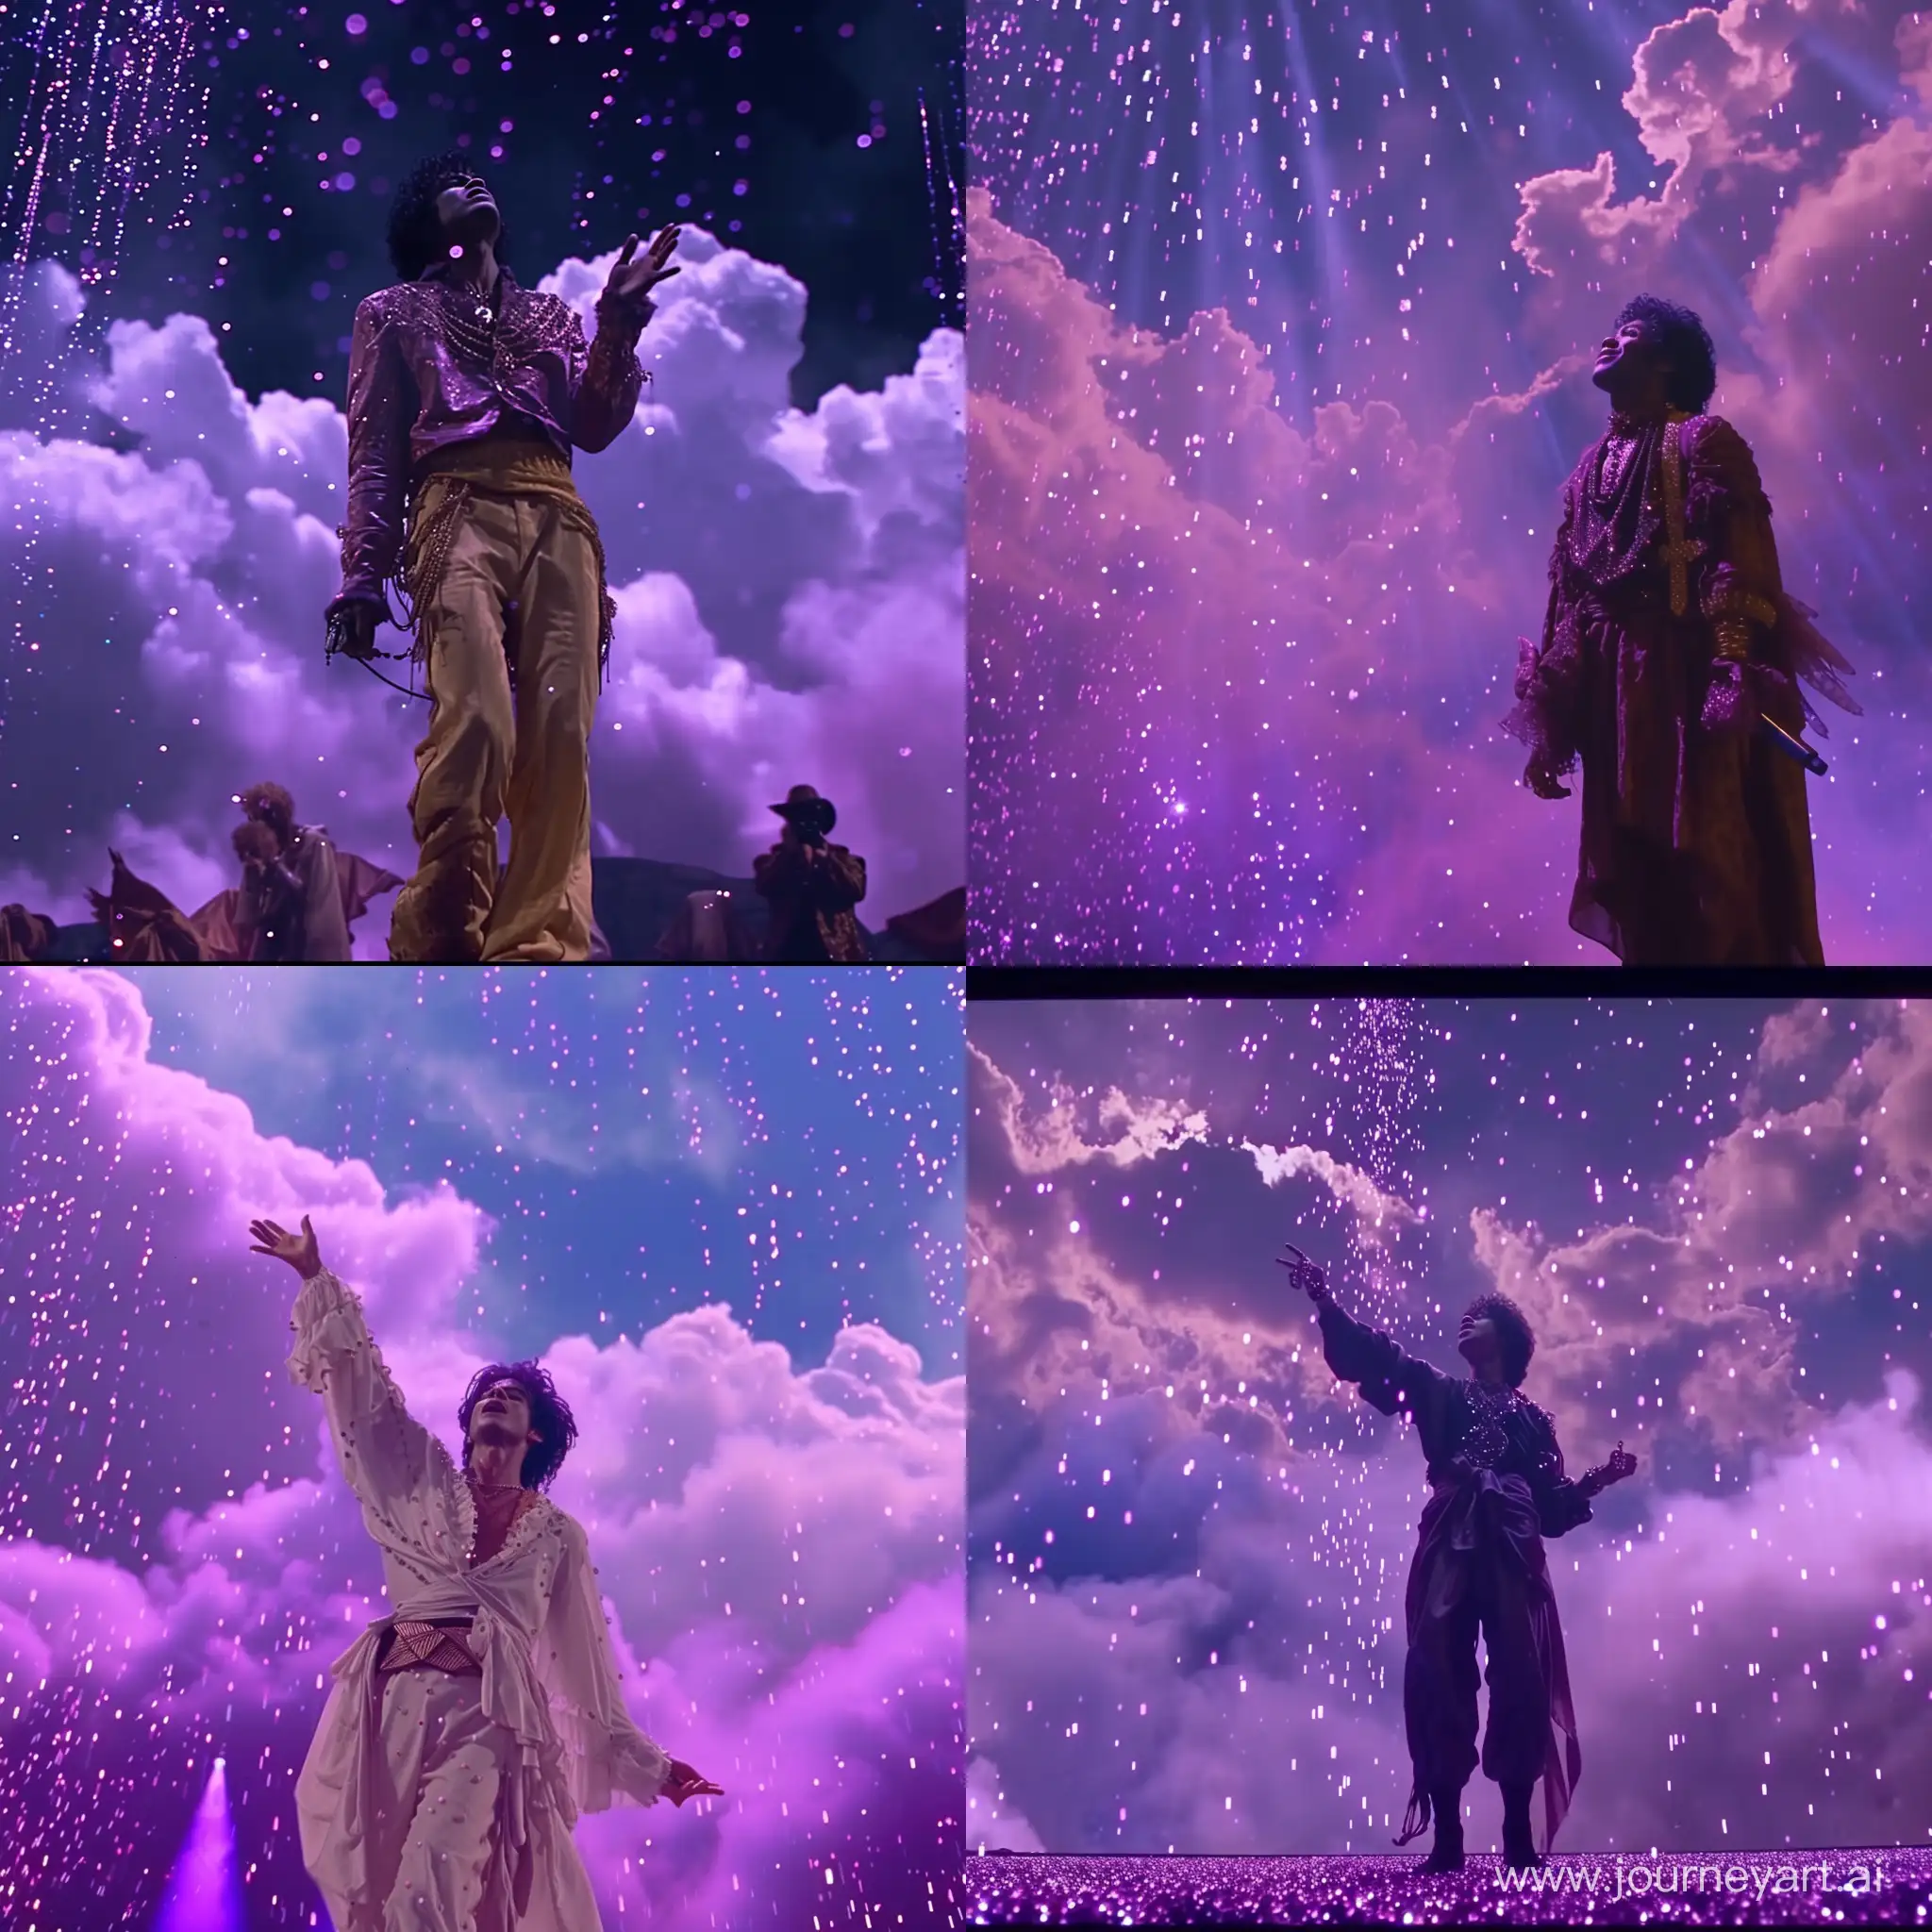 Prince-Performing-on-OpenAir-Stage-with-Purple-Clouds-and-Glitter-Rain